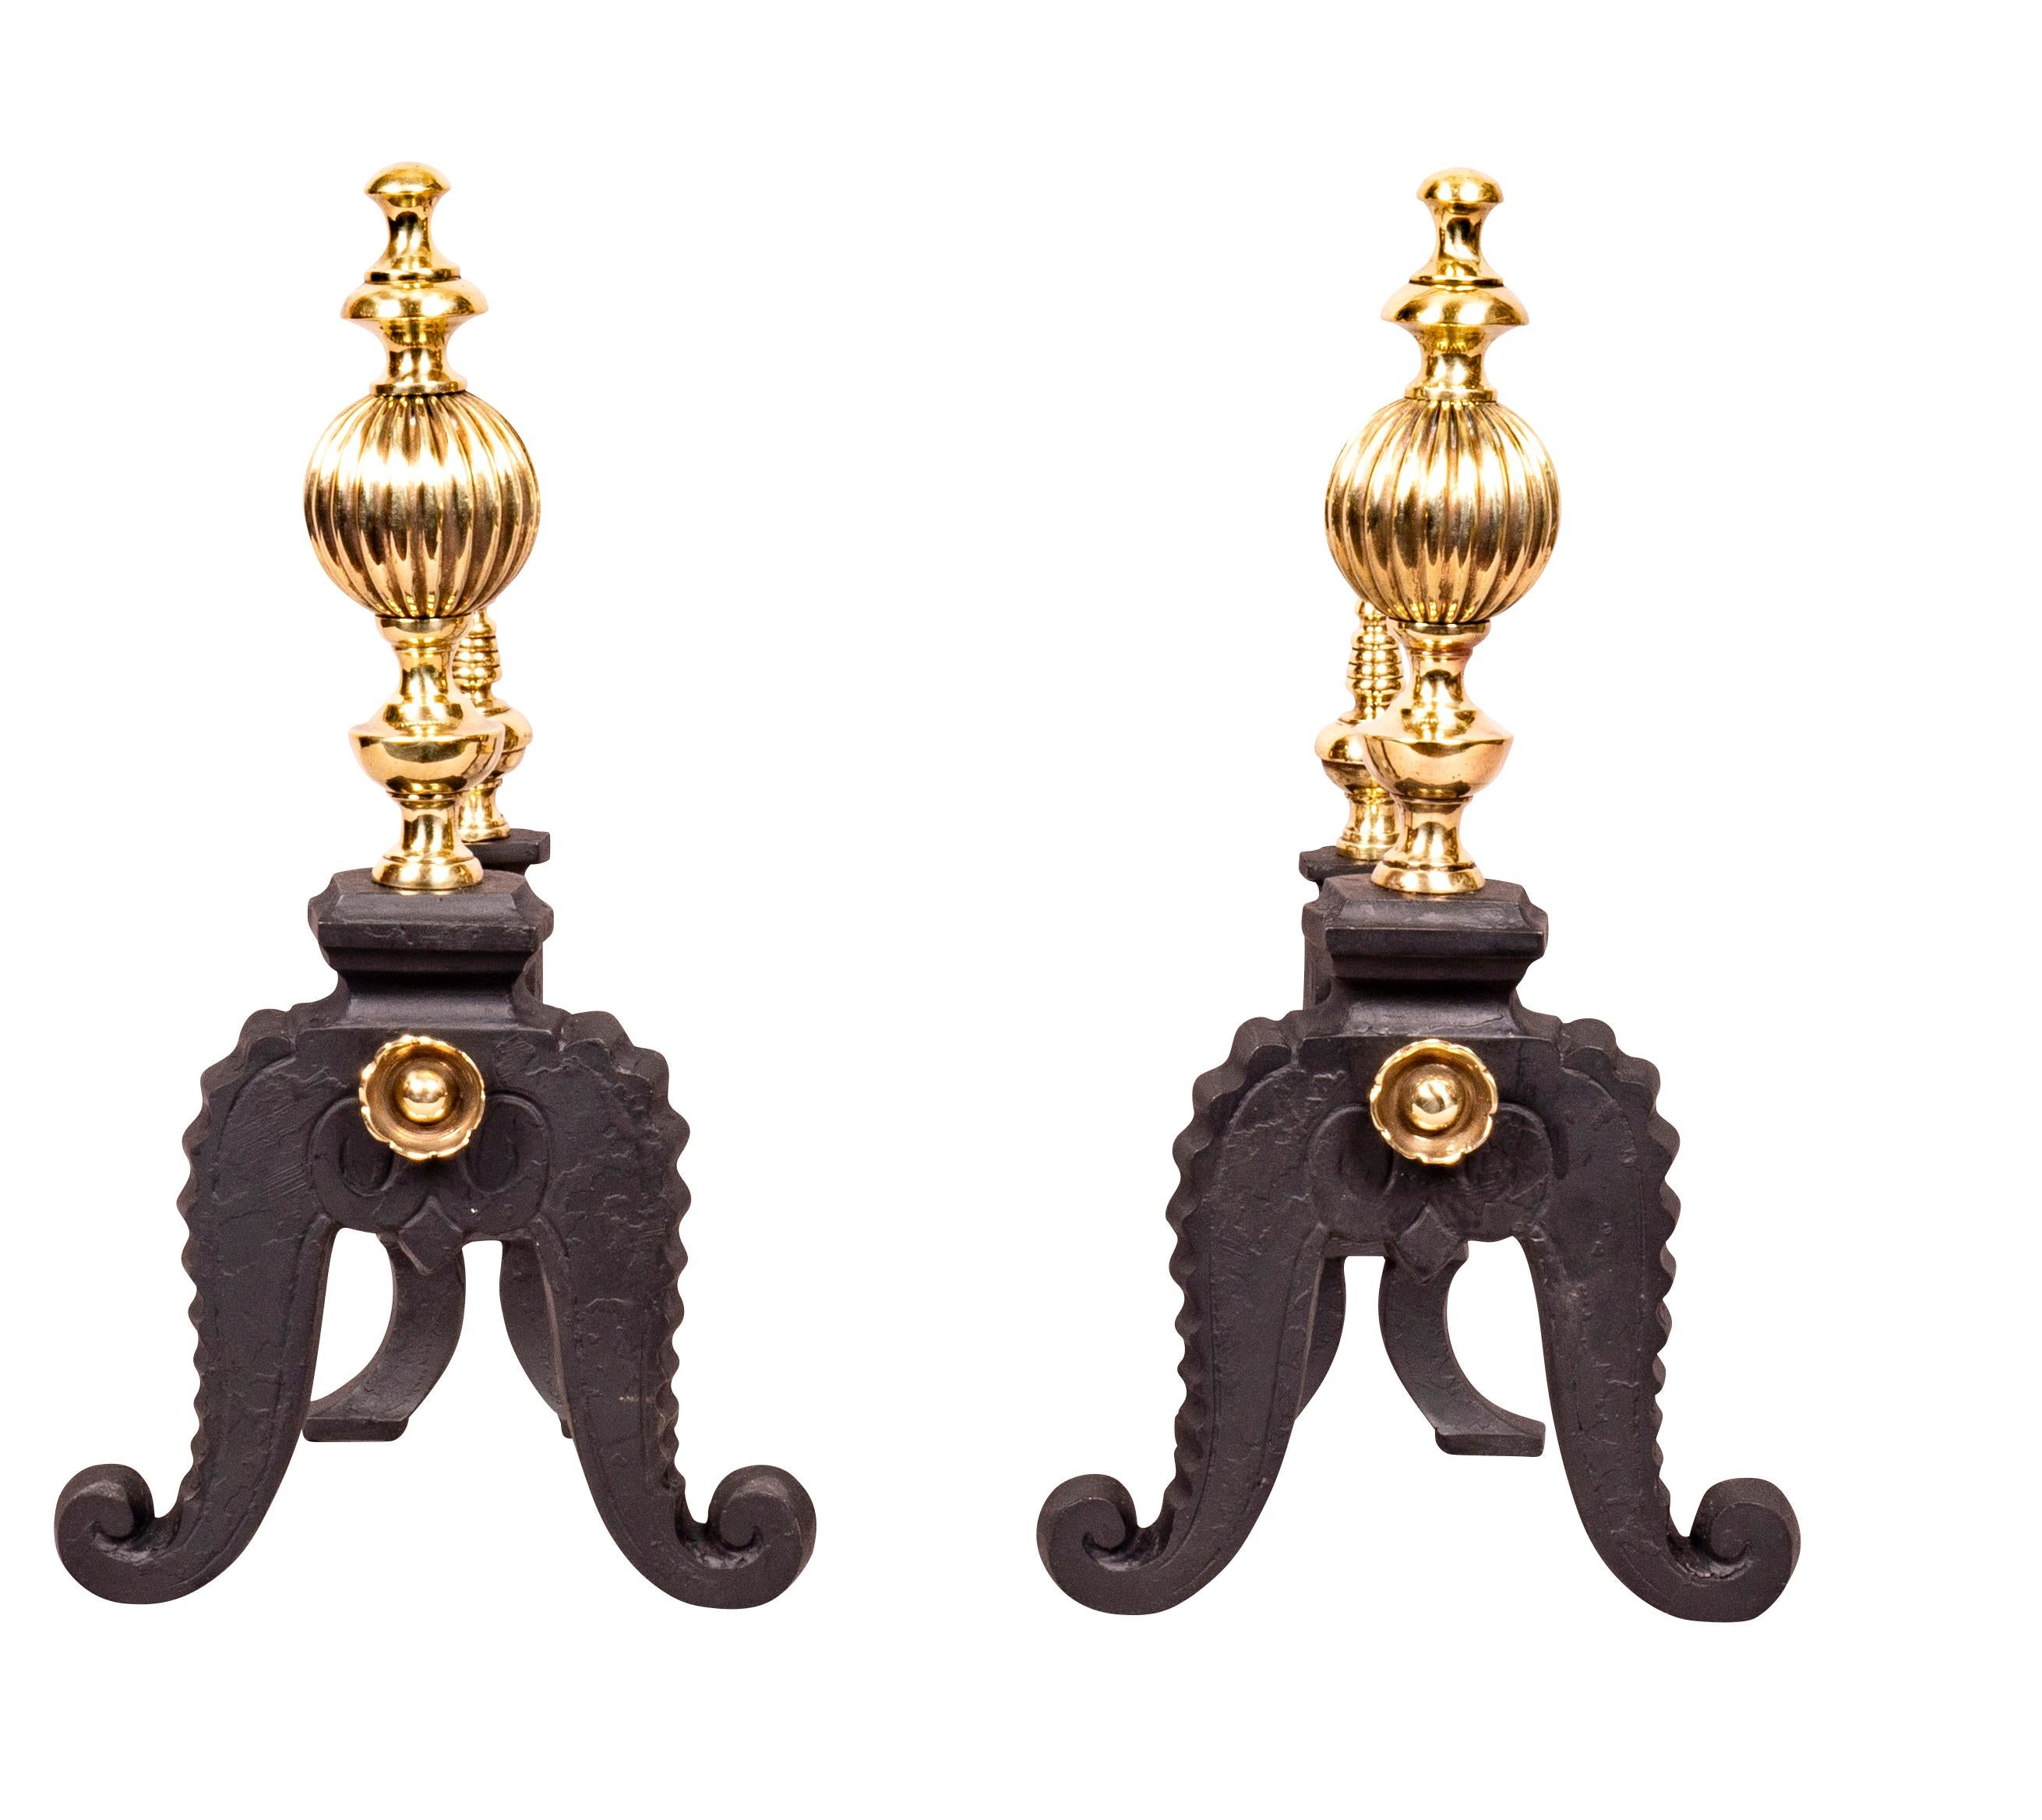 Each with two legs and brass finials, brass tool rest and rear feet and finial.